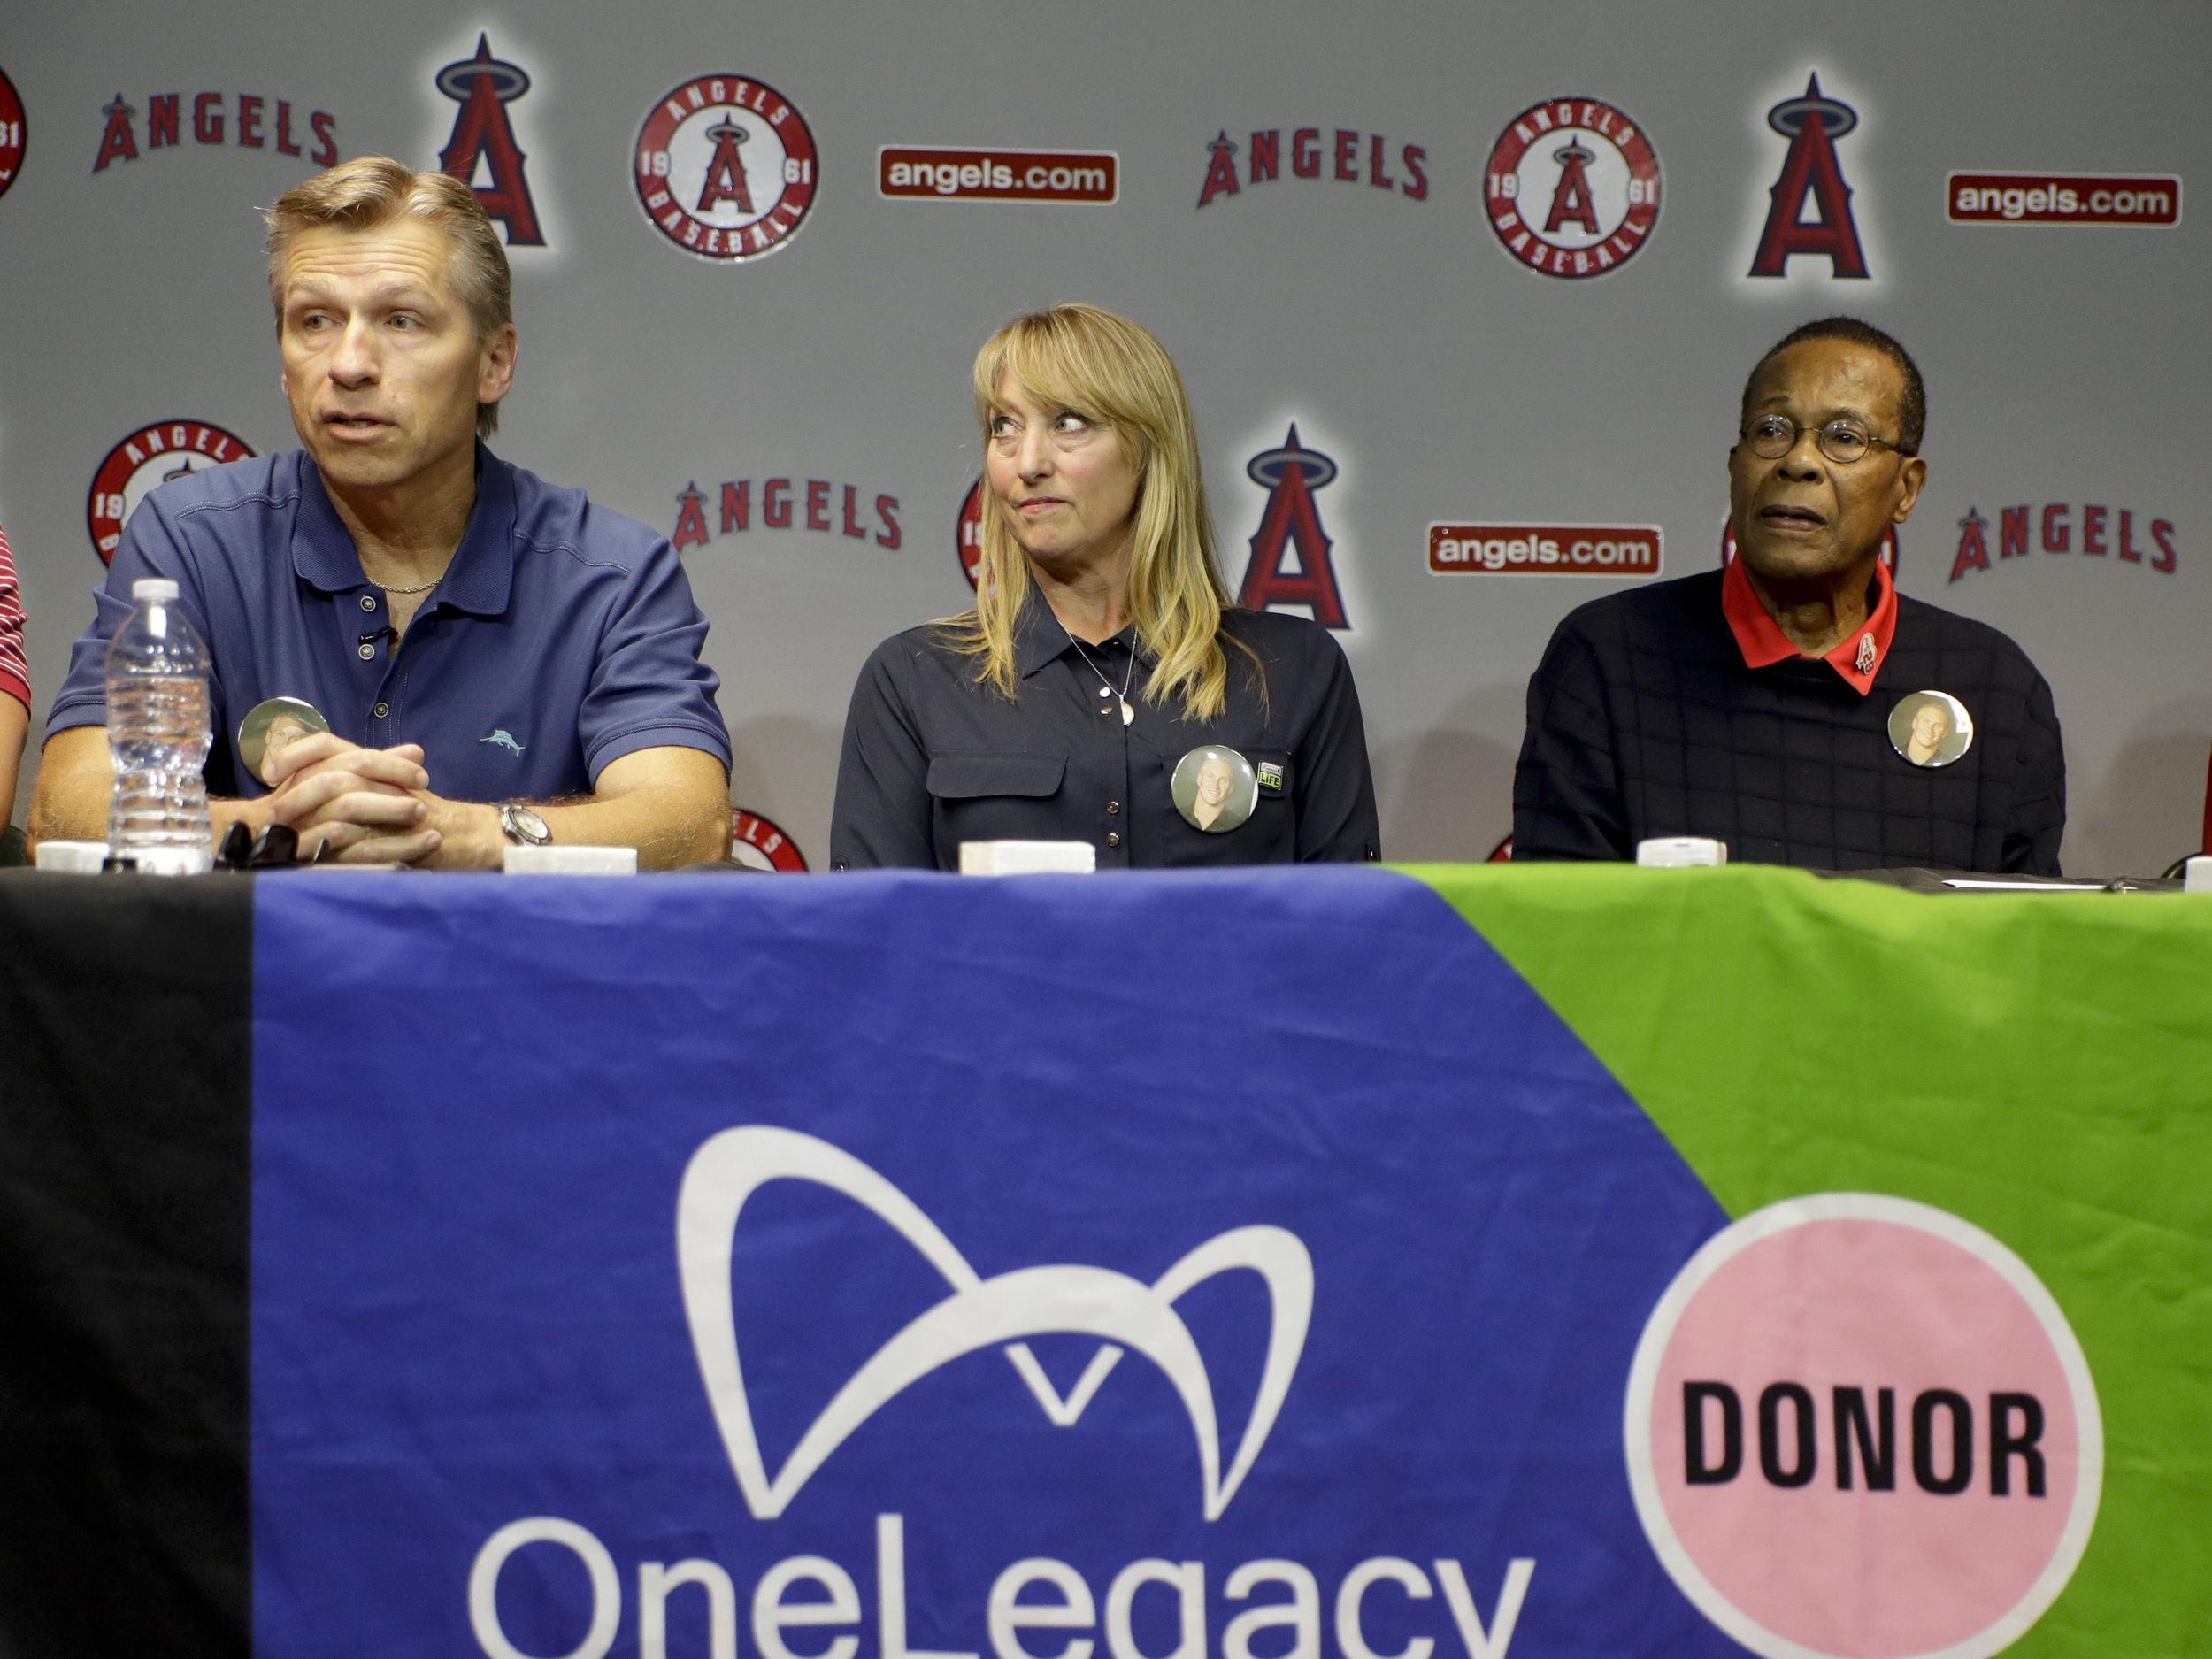 Father of heart donor throws first pitch at Angel Stadium as